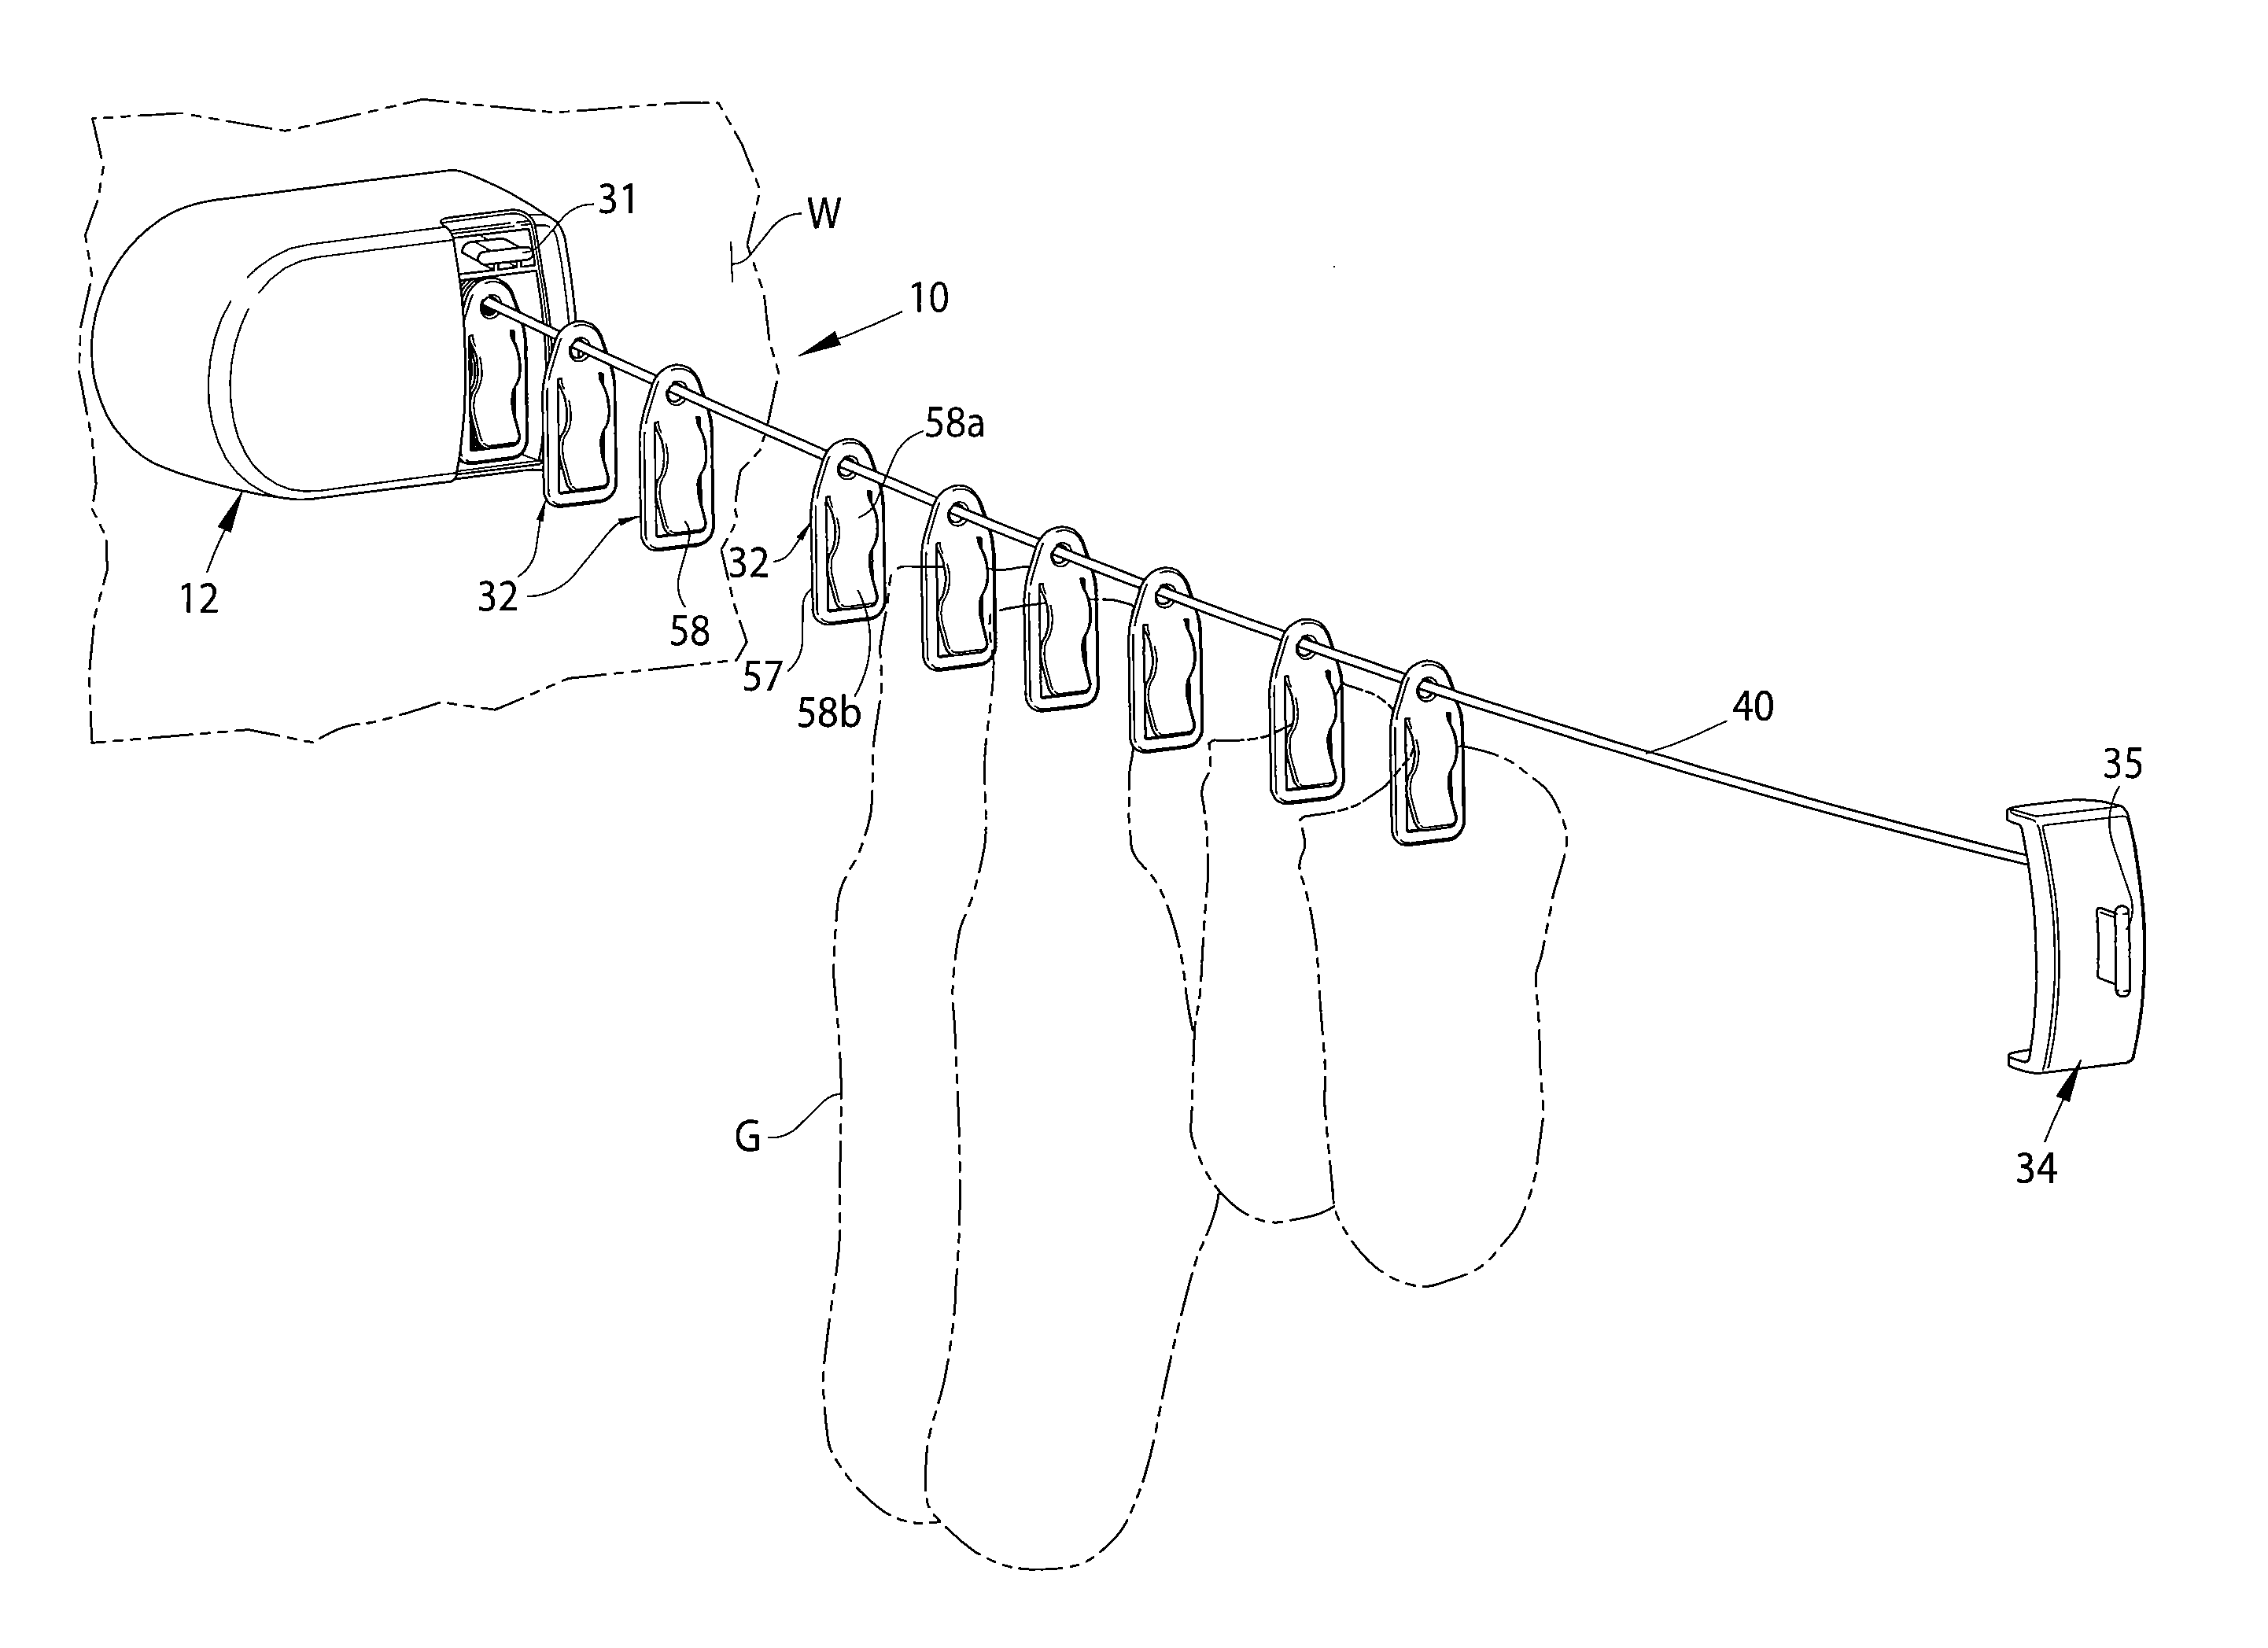 Wall-mounted retractable clothesline assembly